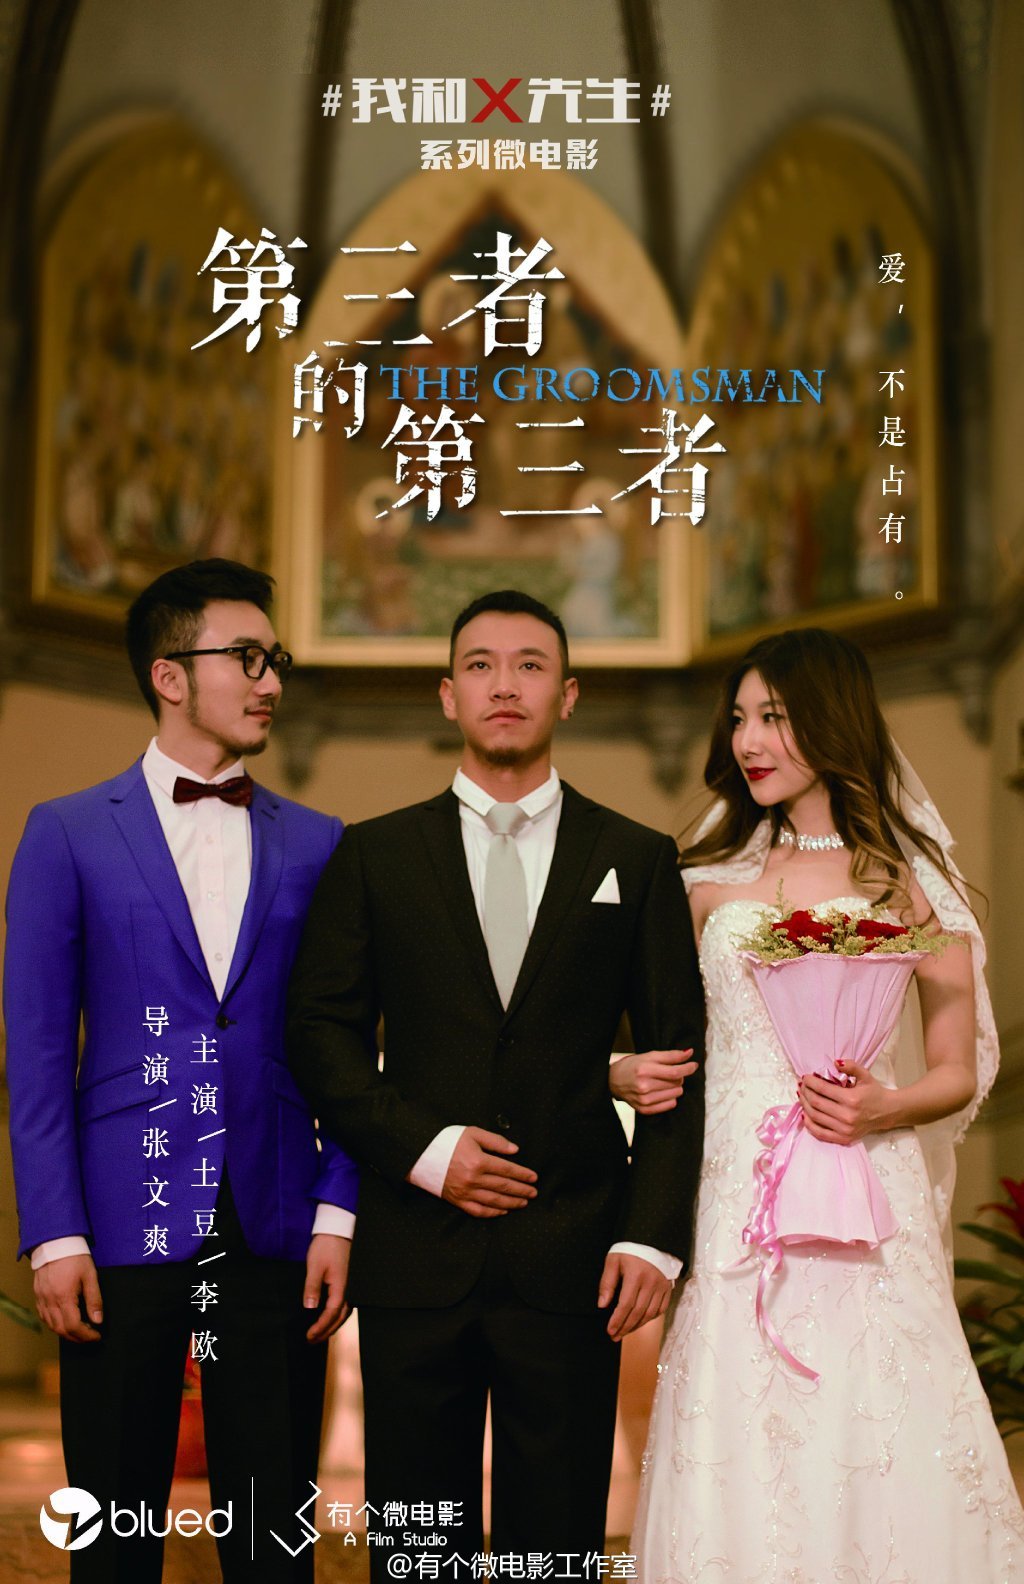 asianboysloveparadise:  Chinese Gay Series “My Lover and I”Episode 3. THE GROOMSMANWatch